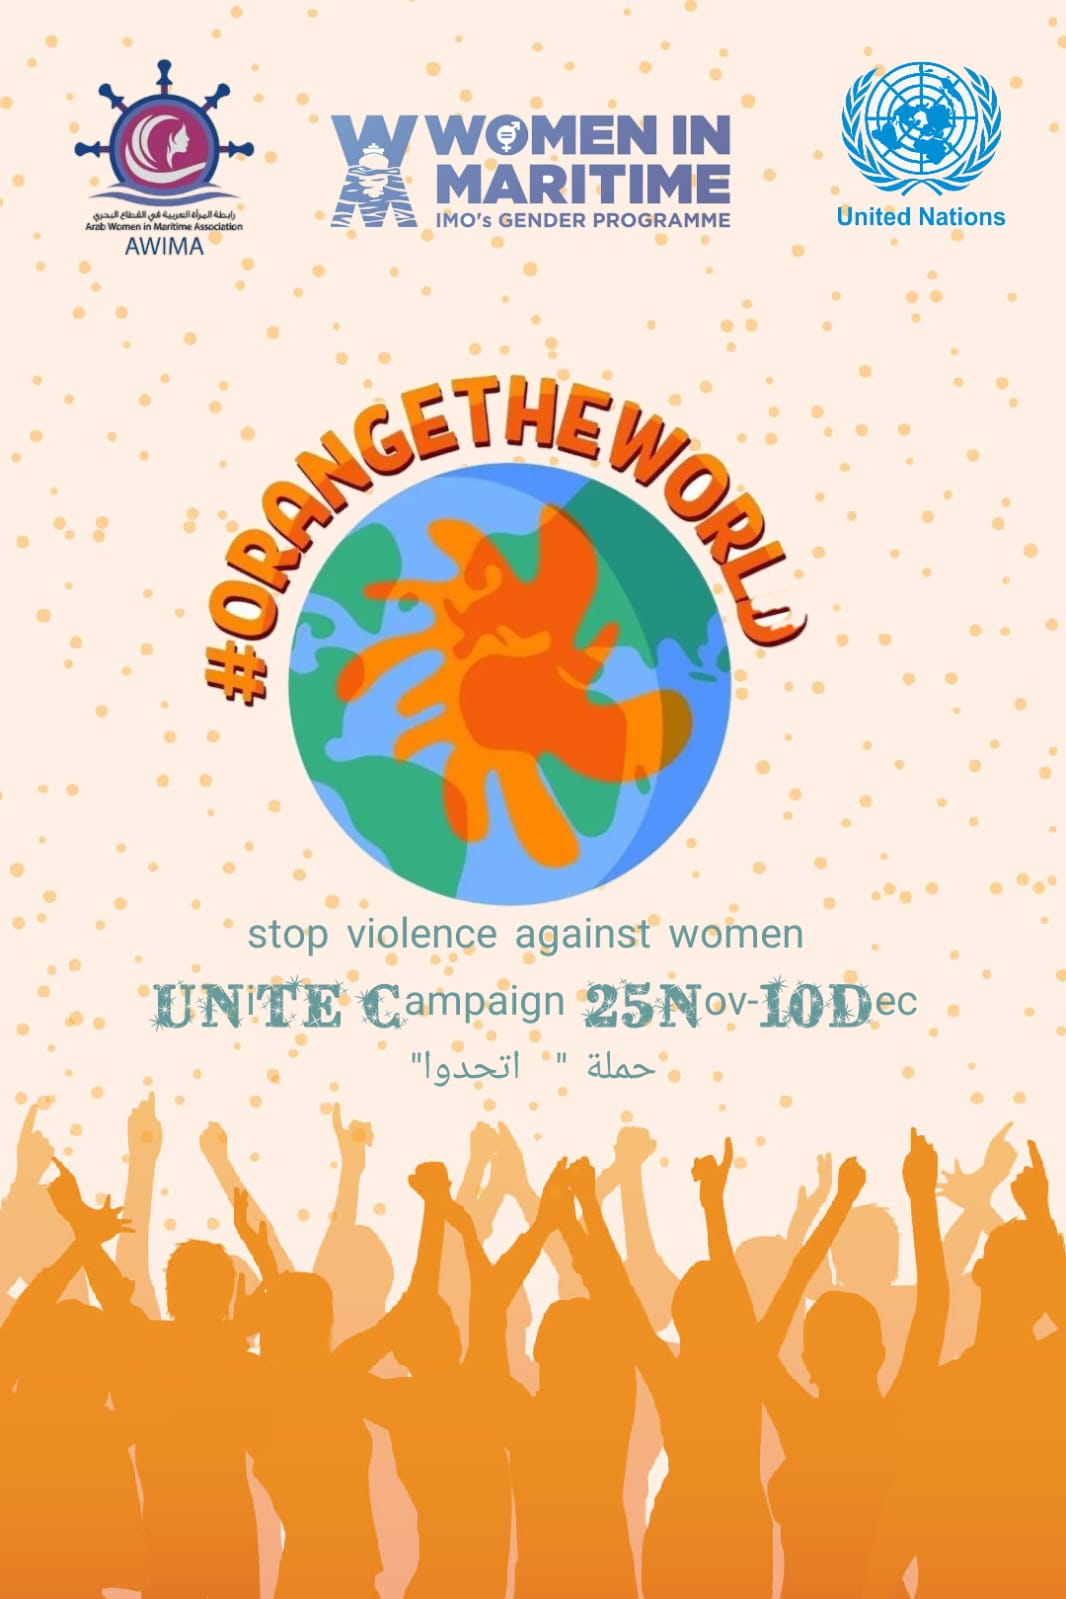 UNiTE! Activism to End Violence against Women & Girls! #MeToo movement